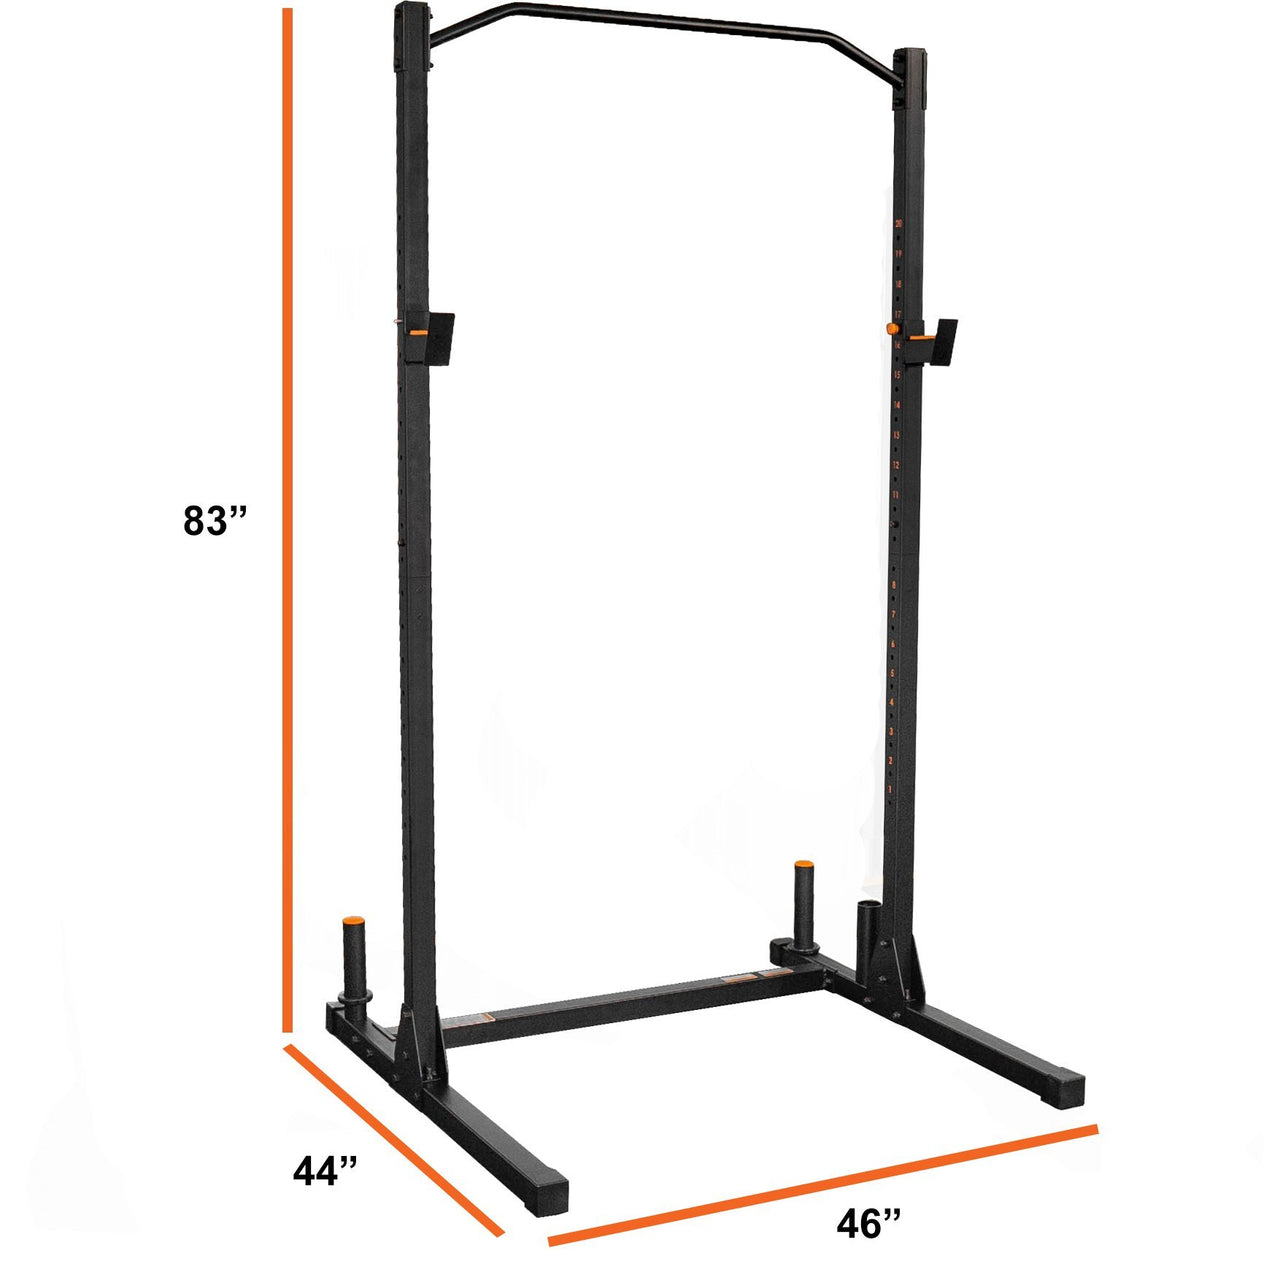 Dimensions of Alpha1000 Squat Stand